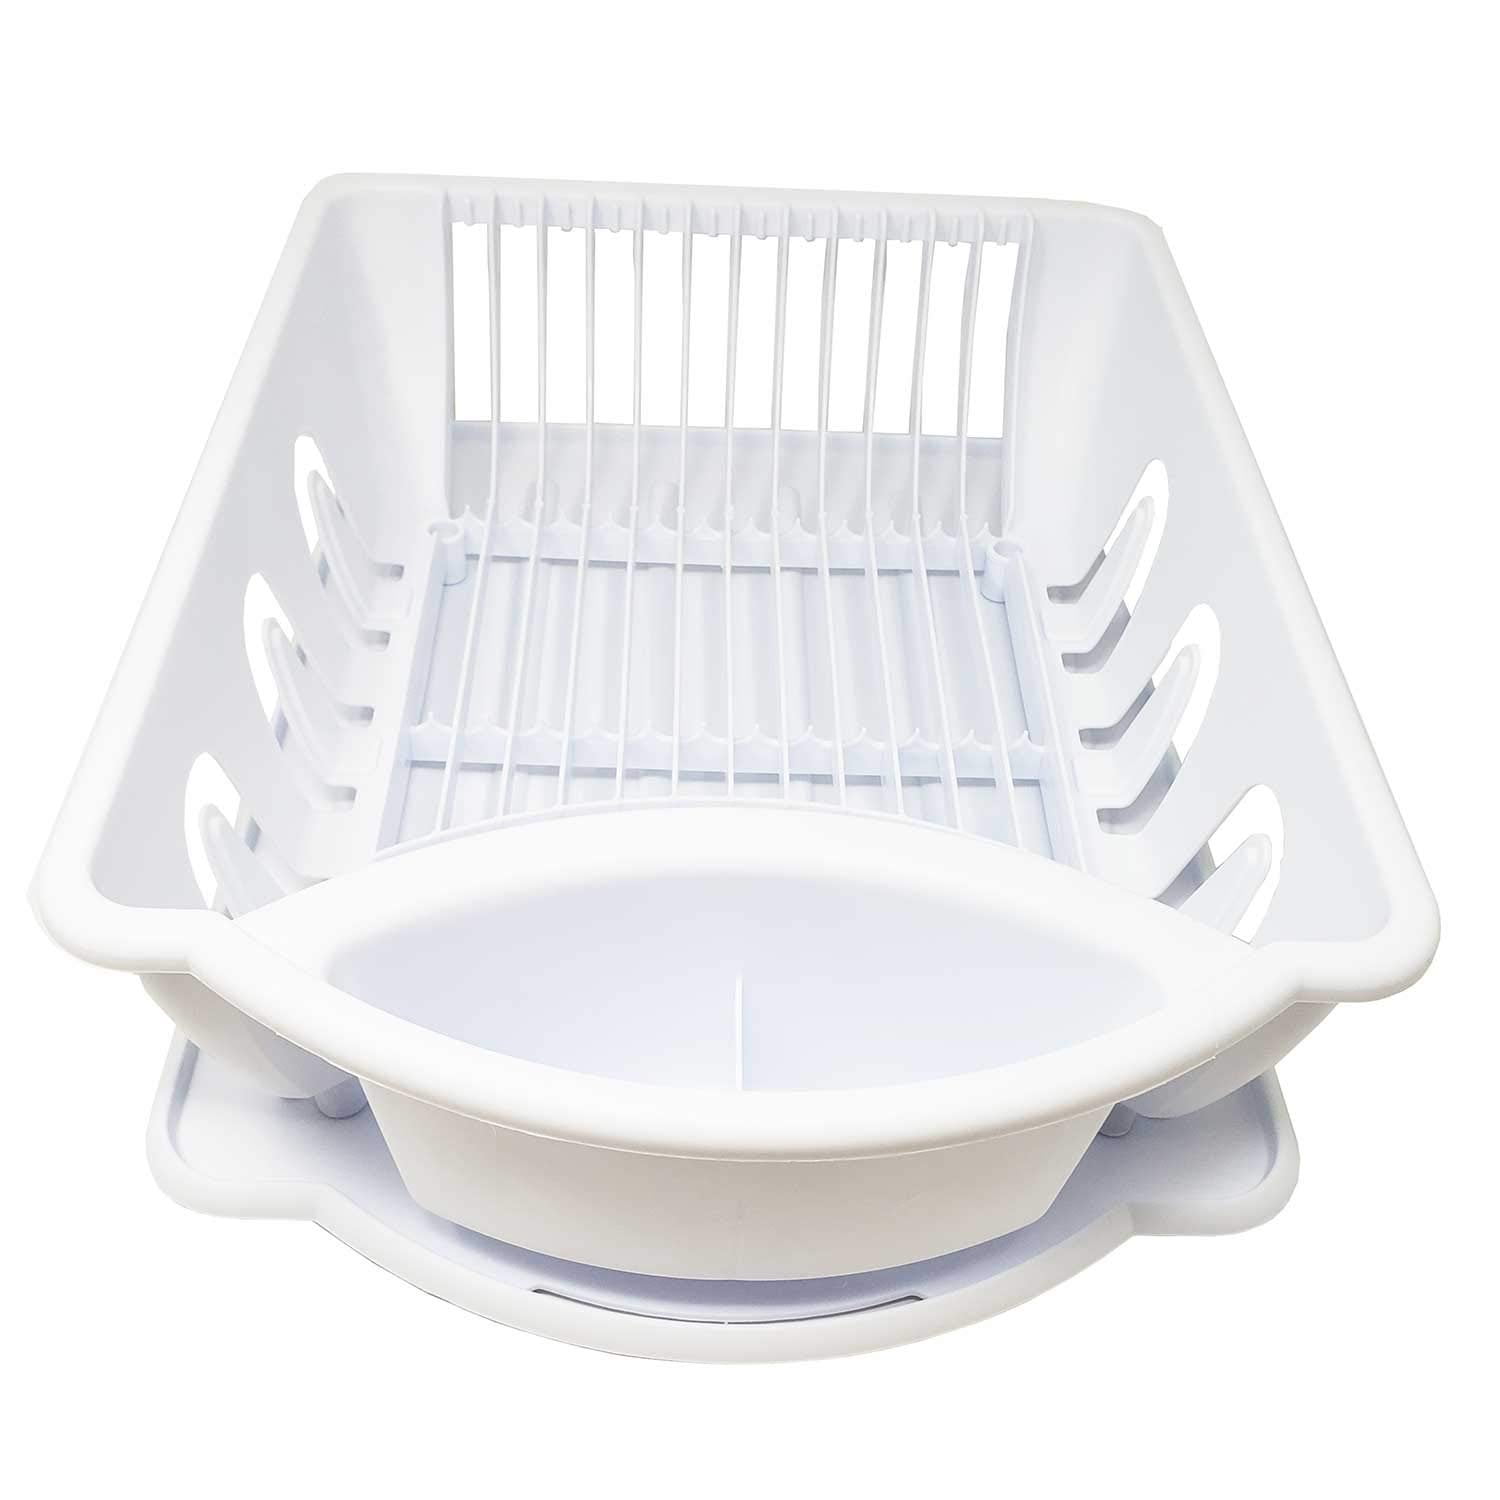 JOEY'Z Heavy Duty Sturdy Hard Plastic Sink Set with Dish Rack with Attached  Drainboard Cup Holders for Home Kitchen Counter Top Organizer - White (17